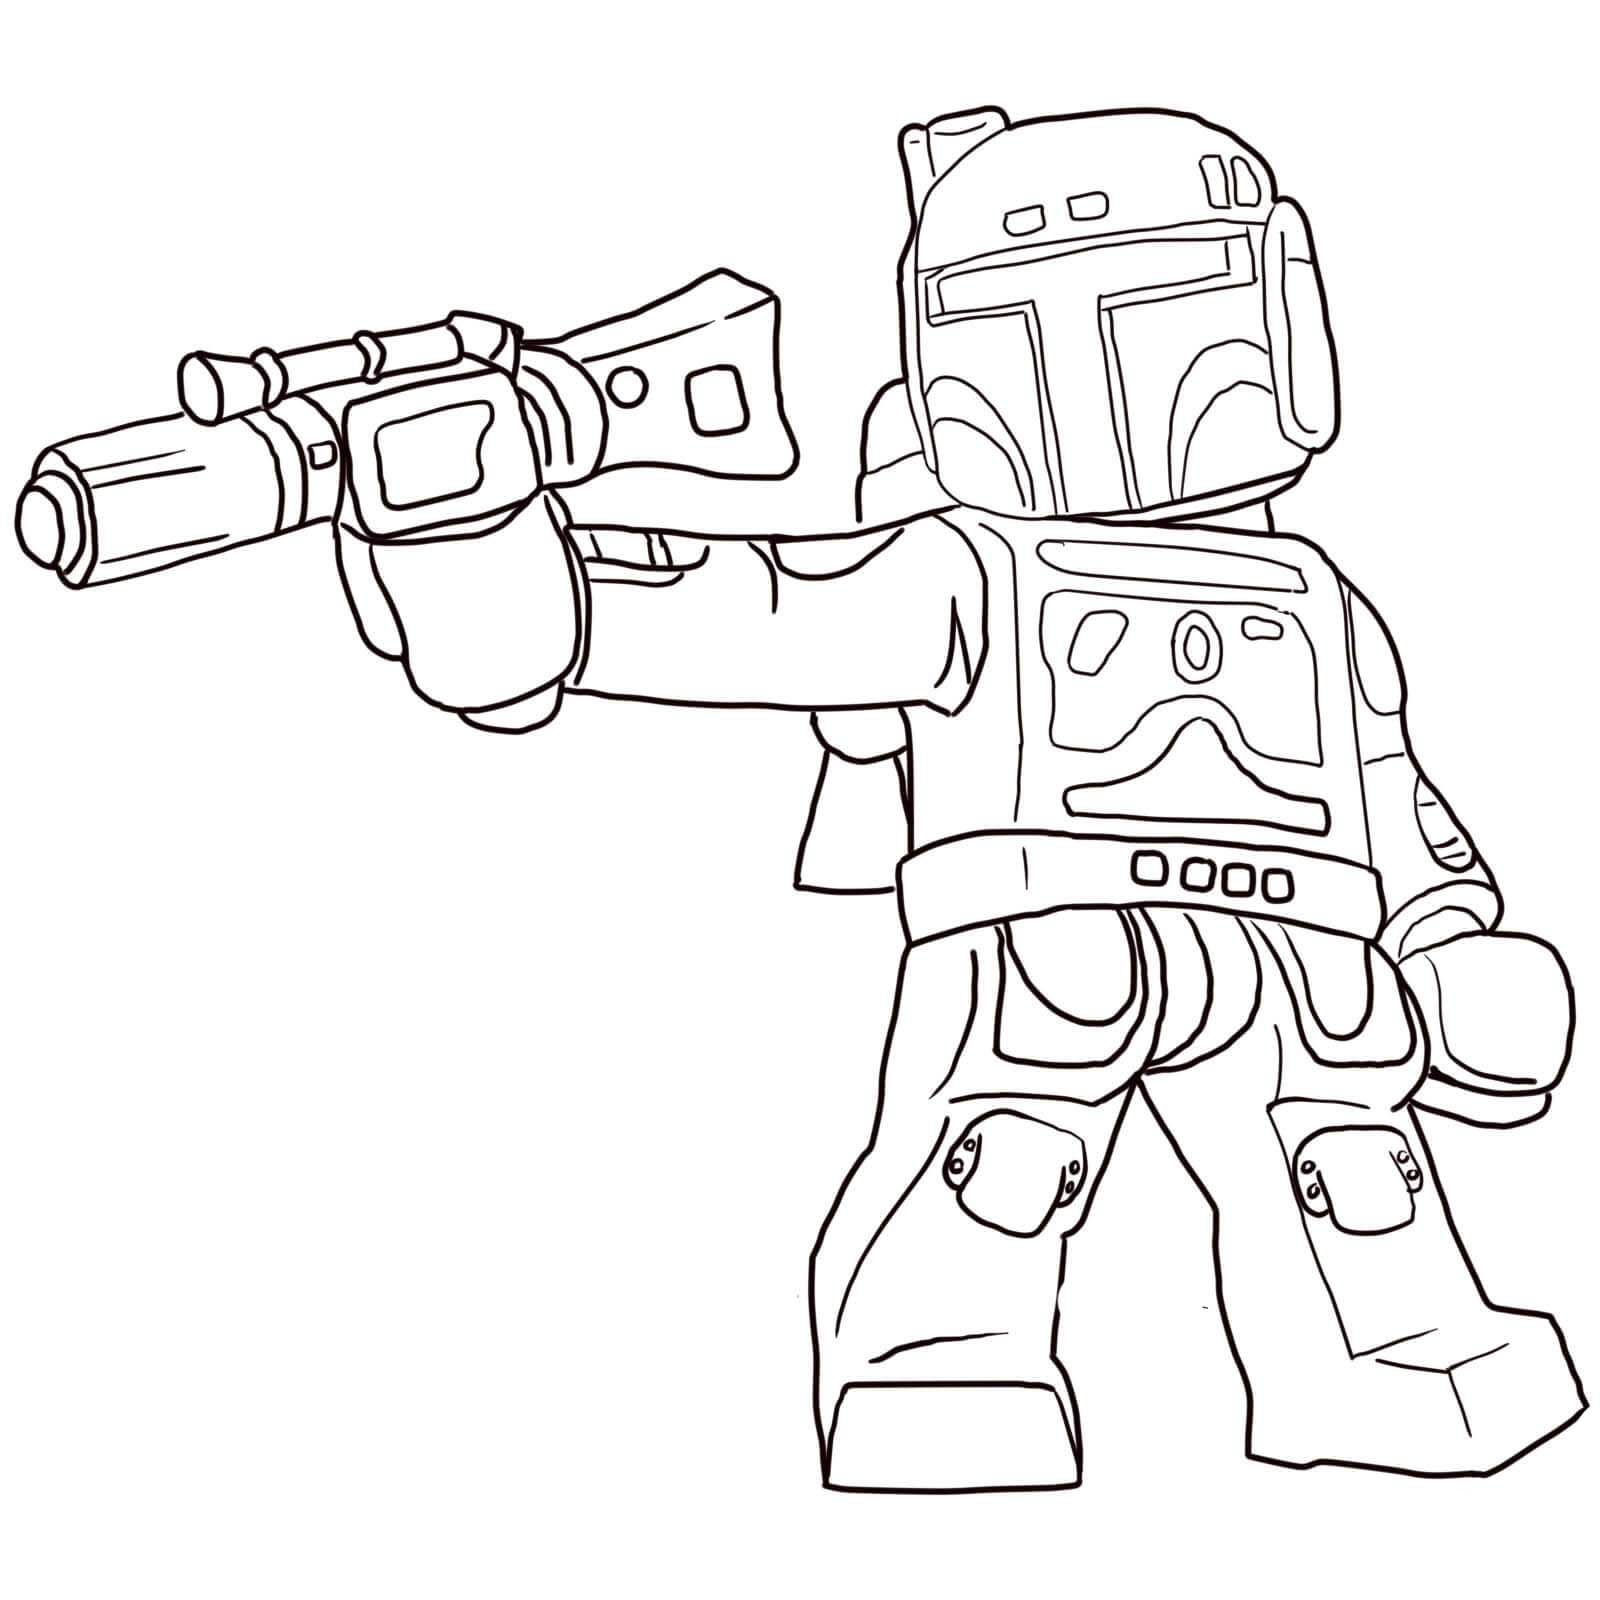 Boba Fett Coloring Pages To Download And Print For Free